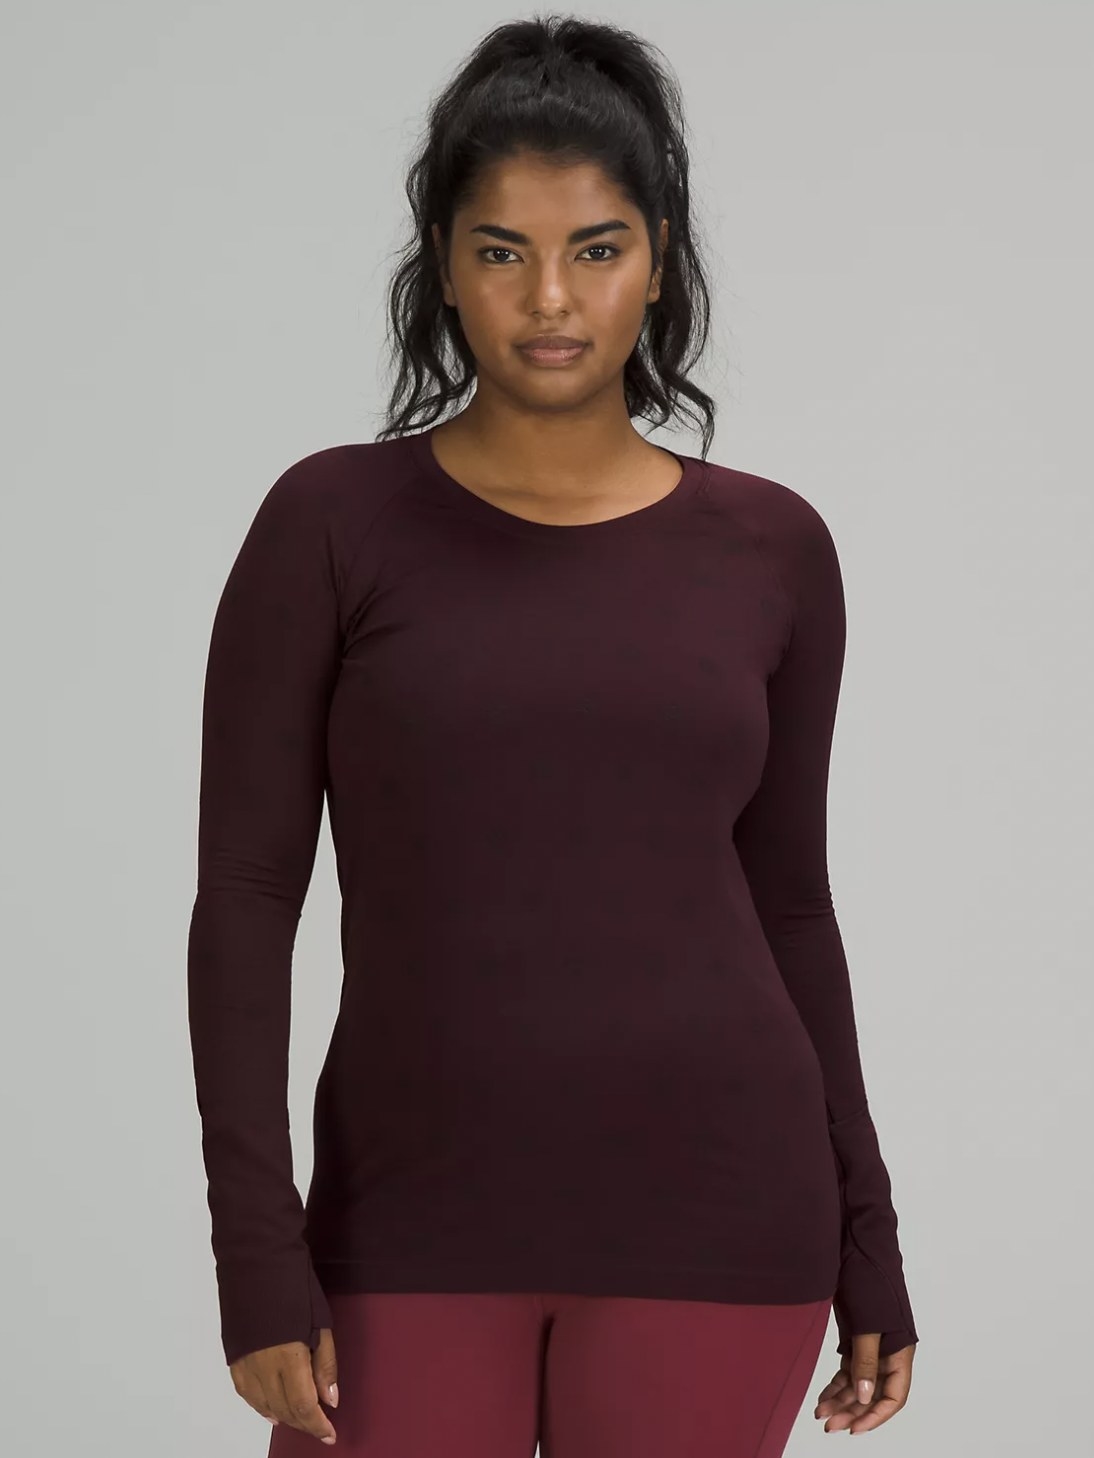 front view of model wearing the long sleeve t-shirt in a red wine color